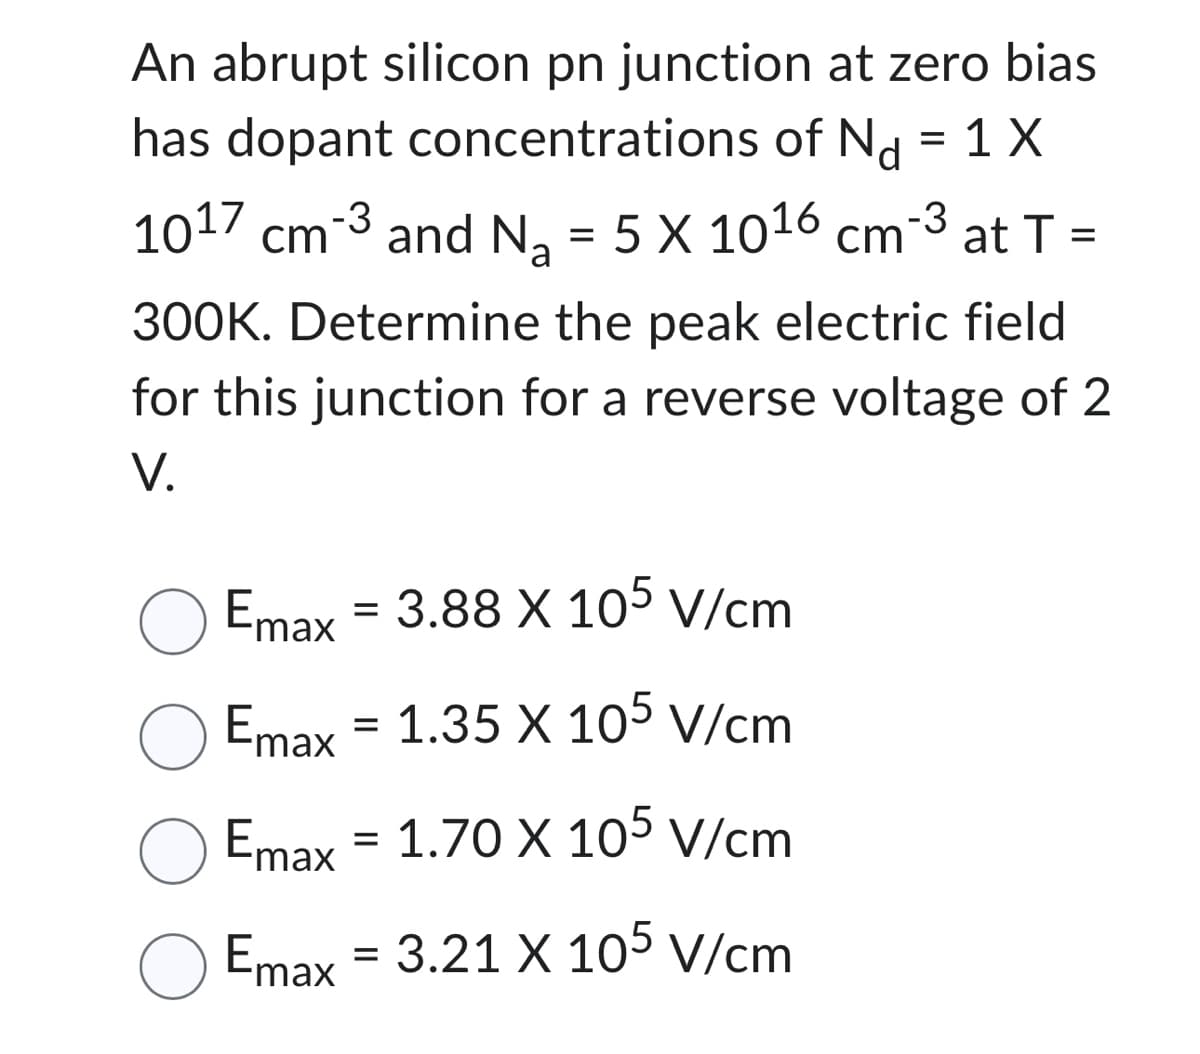 An abrupt silicon pn junction at zero bias
has dopant concentrations of Nd = 1 X
1017 cm-3
cm³ and Na
and N₂ = 5 X 1016 cm¯³ at T =
300K. Determine the peak electric field
for this junction for a reverse voltage of 2
V.
Emax = 3.88 X 105 V/cm
Emax = 1.35 X 105 V/cm
Emax
1.70 X 105 V/cm
O Emax = 3.21 X 105 V/cm
=